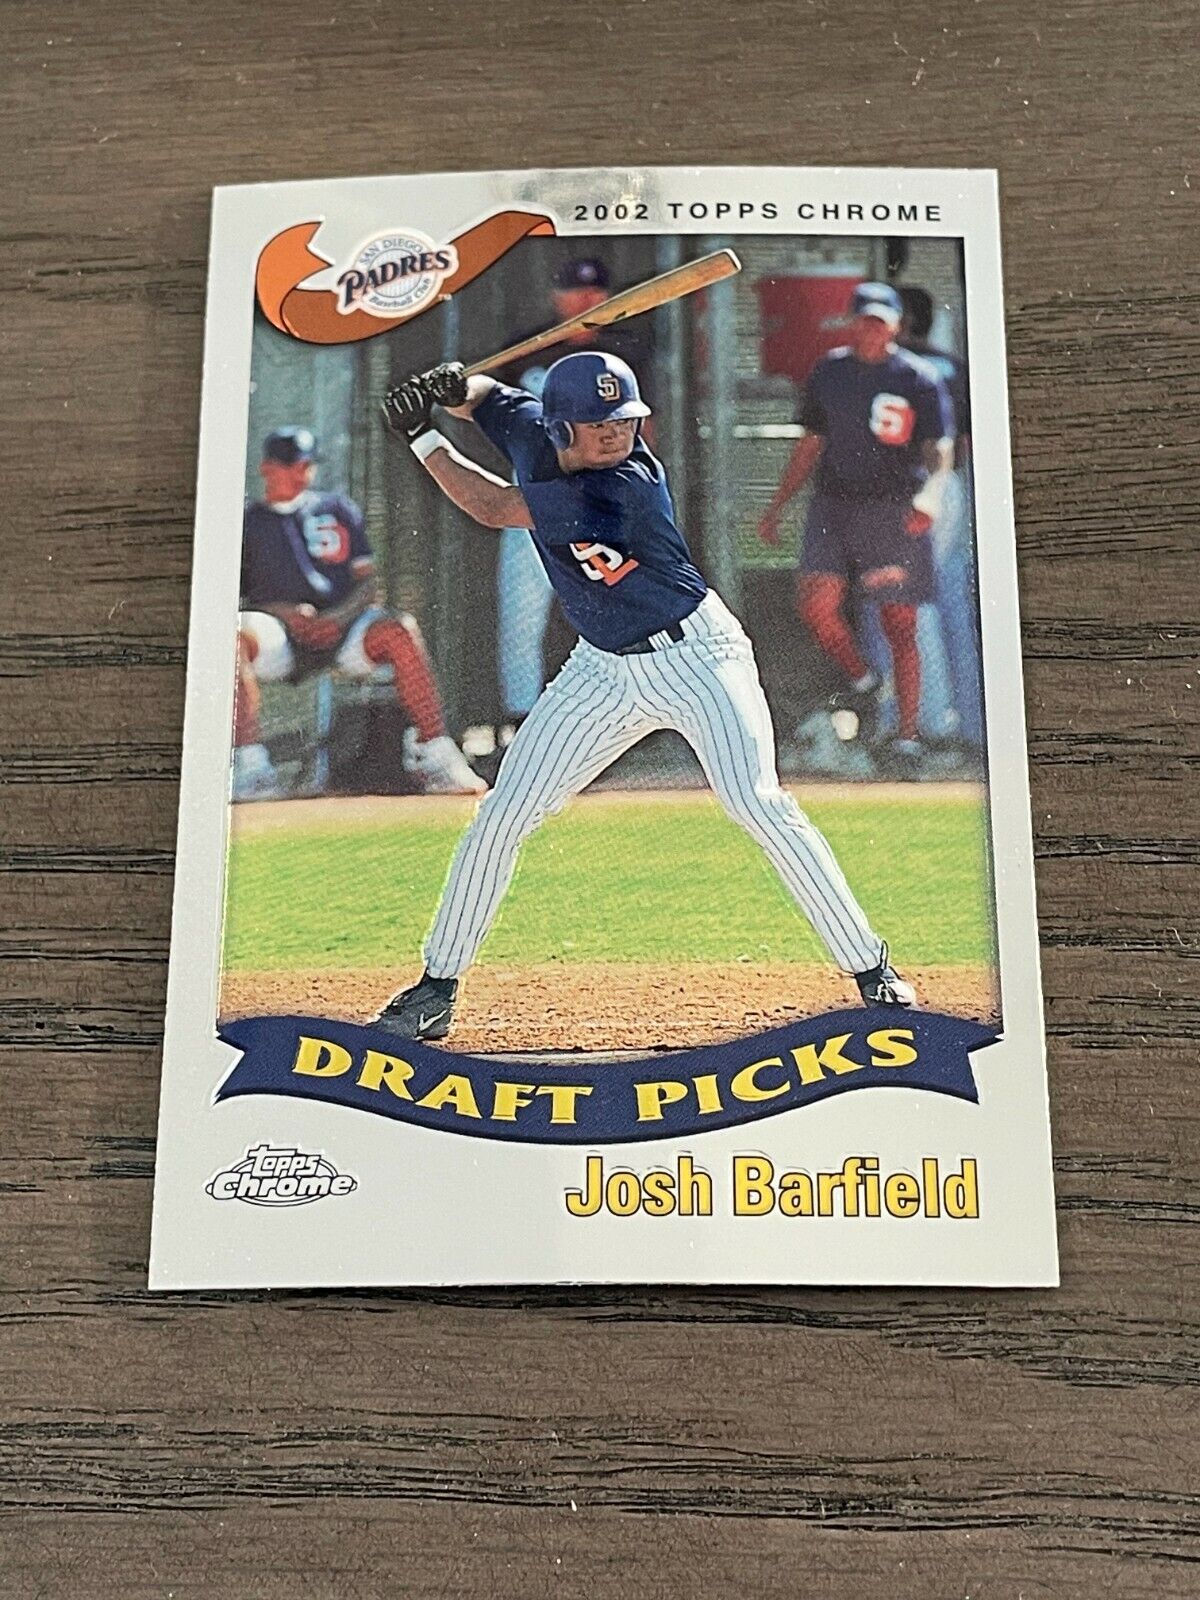 2002 Topps Chrome Josh Barfield Rookie Card #693 San Diego Padres . rookie card picture